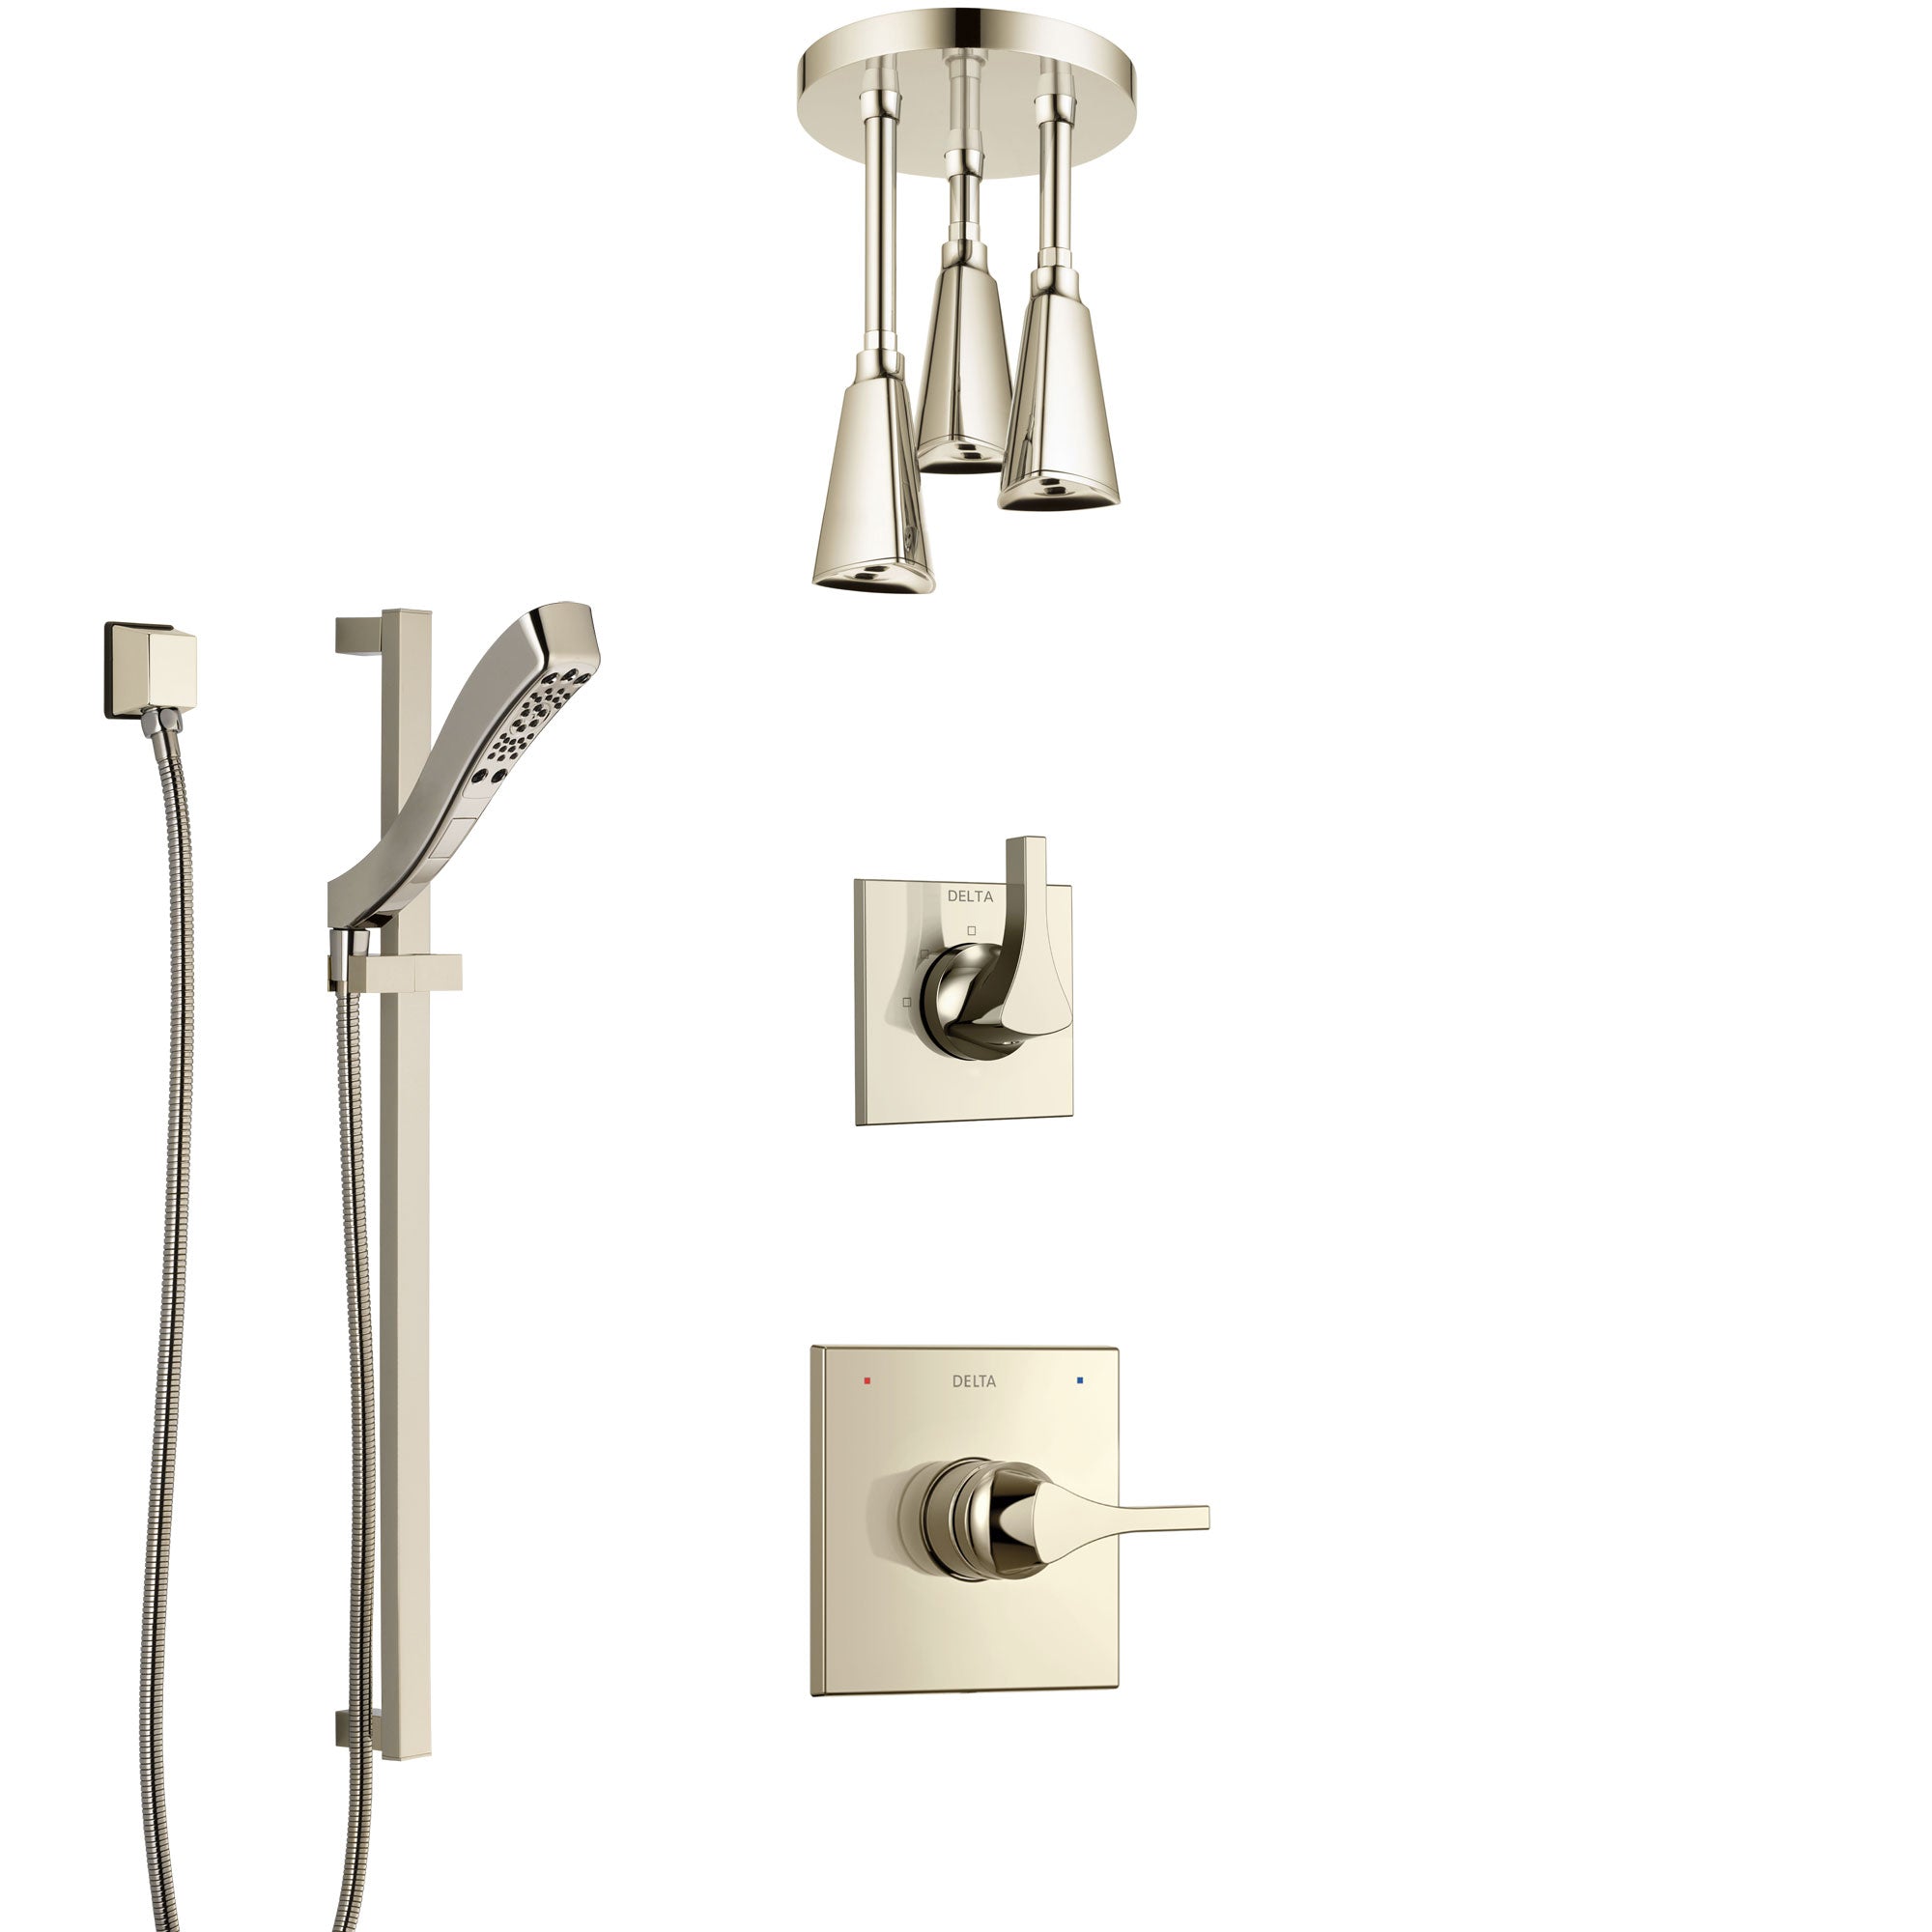 Delta Zura Polished Nickel Shower System with Control Handle, 3-Setting Diverter, Ceiling Mount Showerhead, and Hand Shower with Slidebar SS1474PN7